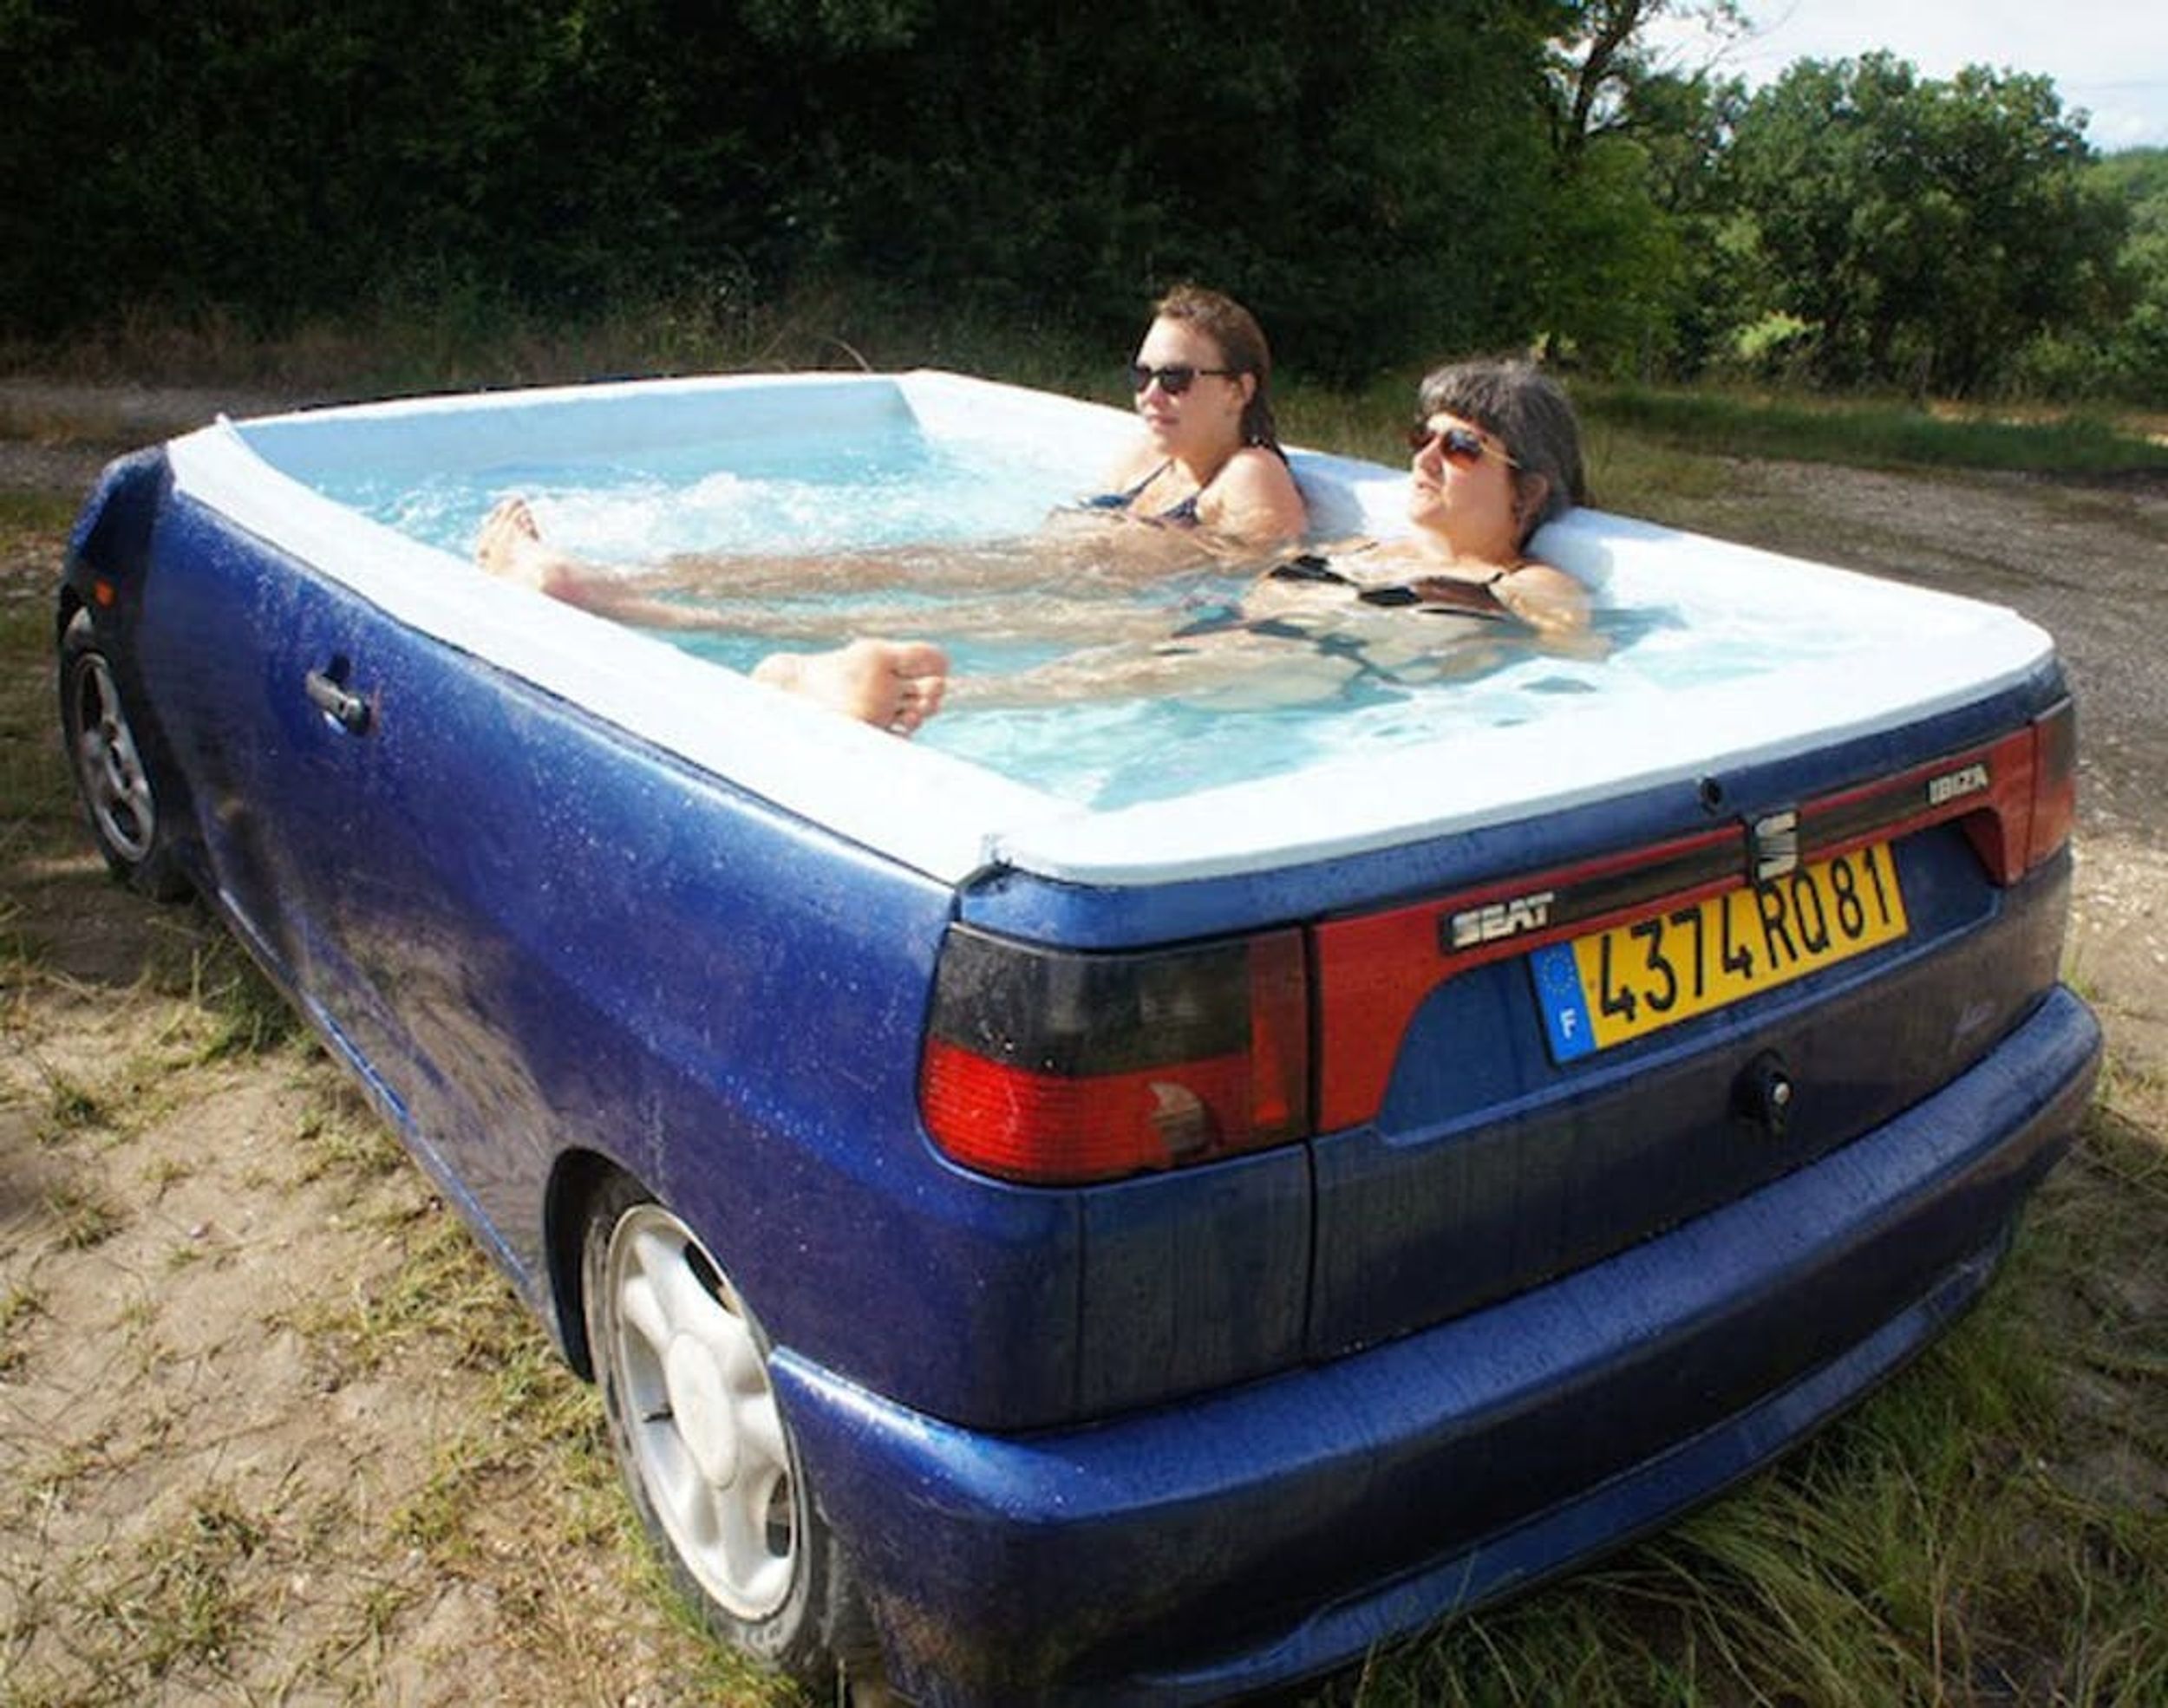 Nothin’ to See Here, Just a Casual Hot Tub Car